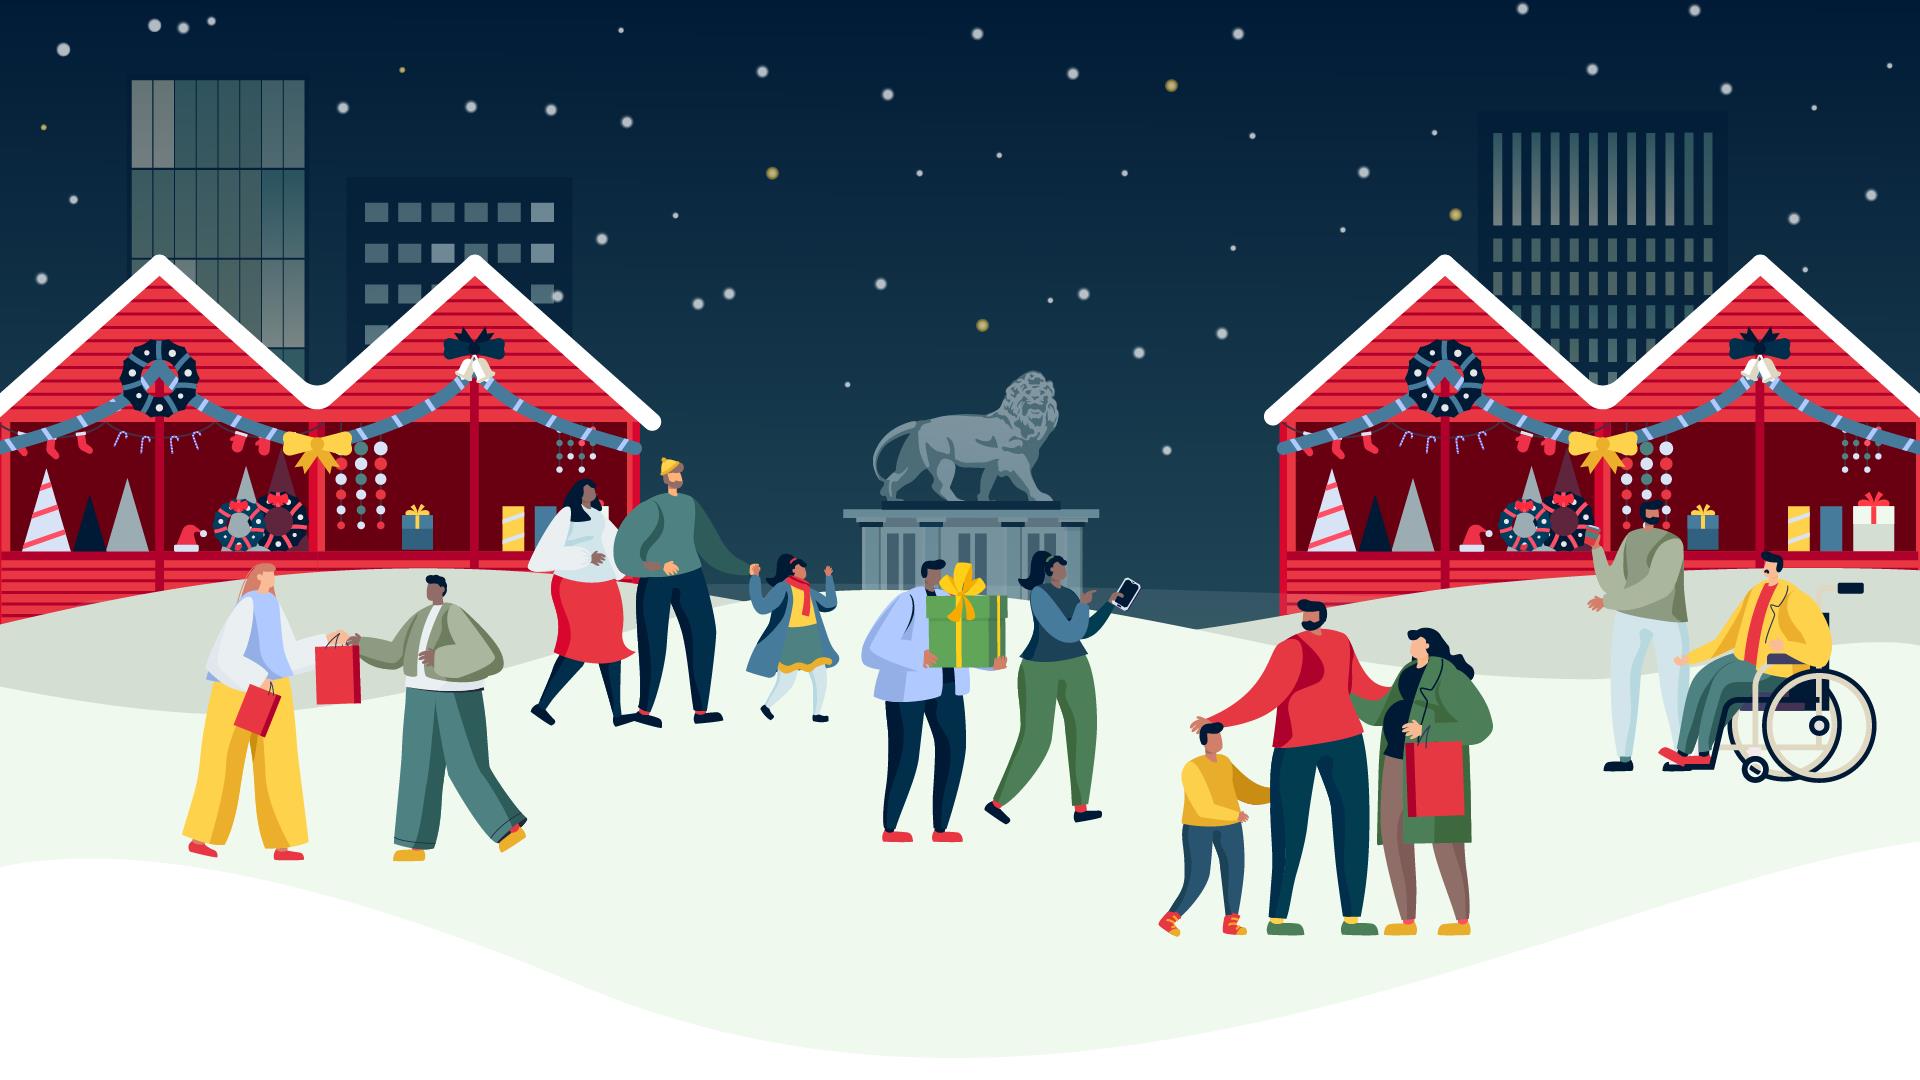 Illustrated Christmas scene showing people Christmas shopping in Reading